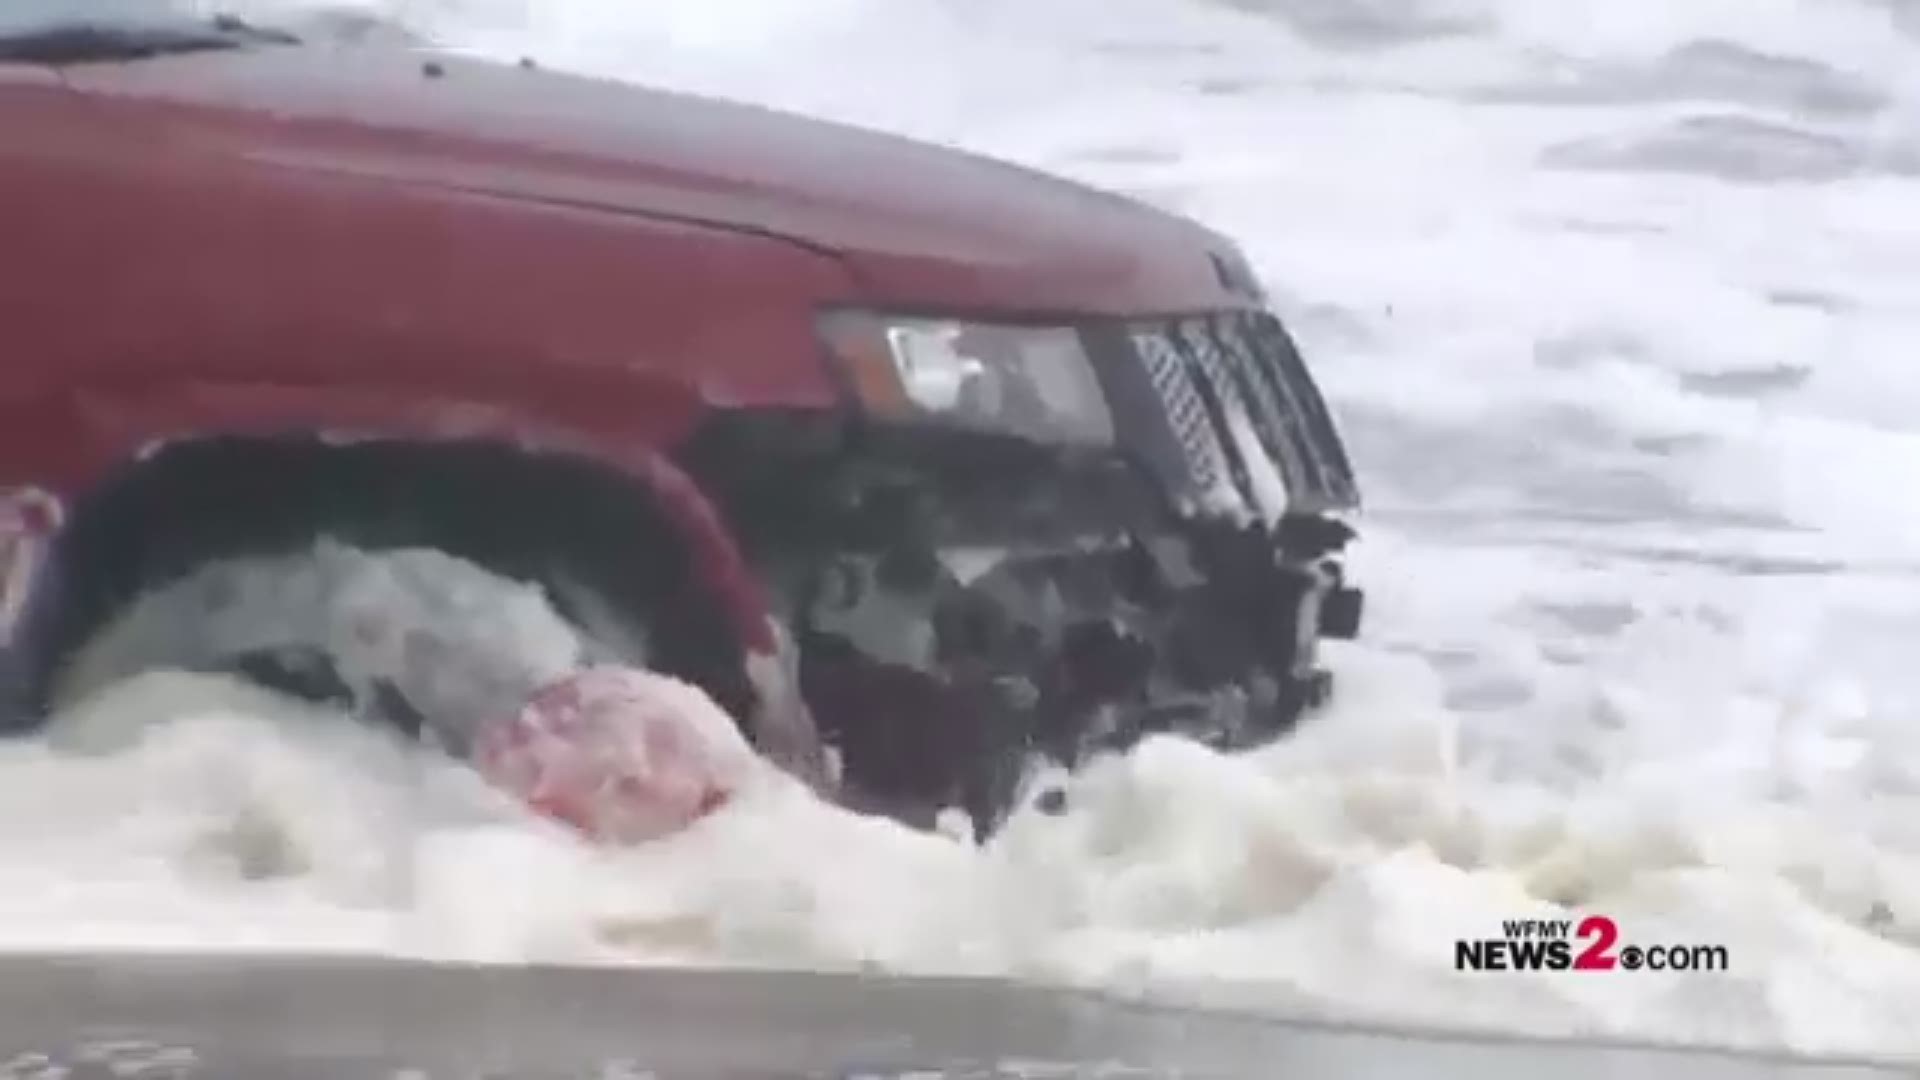 The mysterious look that has captivated hundreds across social media--why is there an SUV on Myrtle Beach? The SUV is taking quite a beating from high tide and surf, created by Hurricane Dorian.